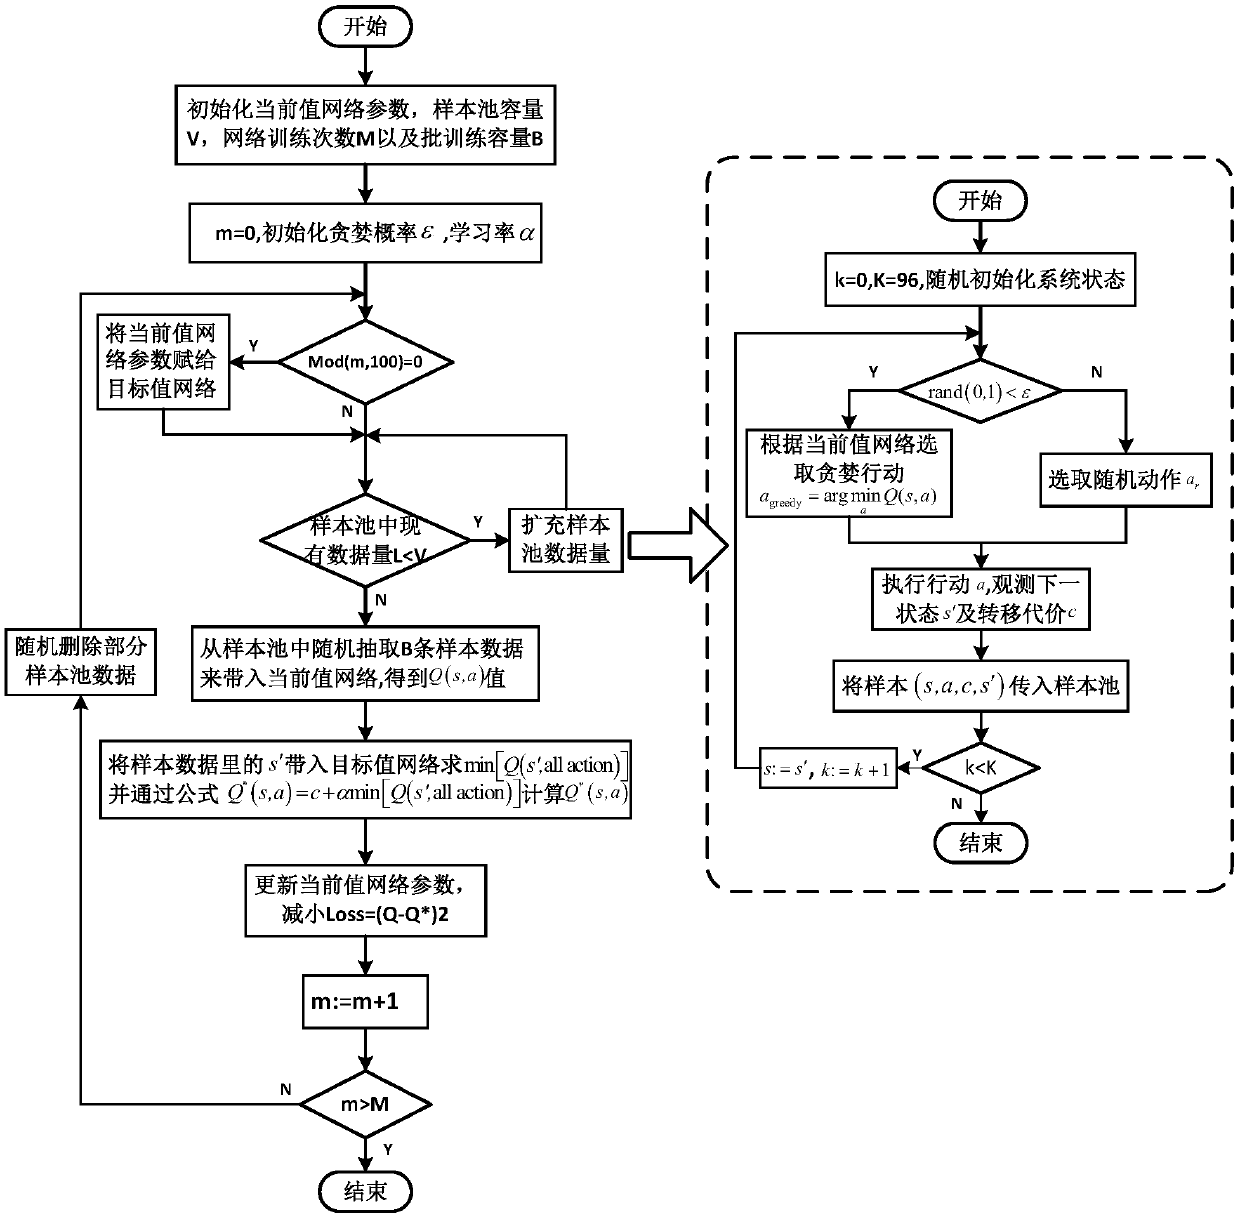 A method for dynamic dispatch optimization of generation and transmission system of cross-region interconnected power network